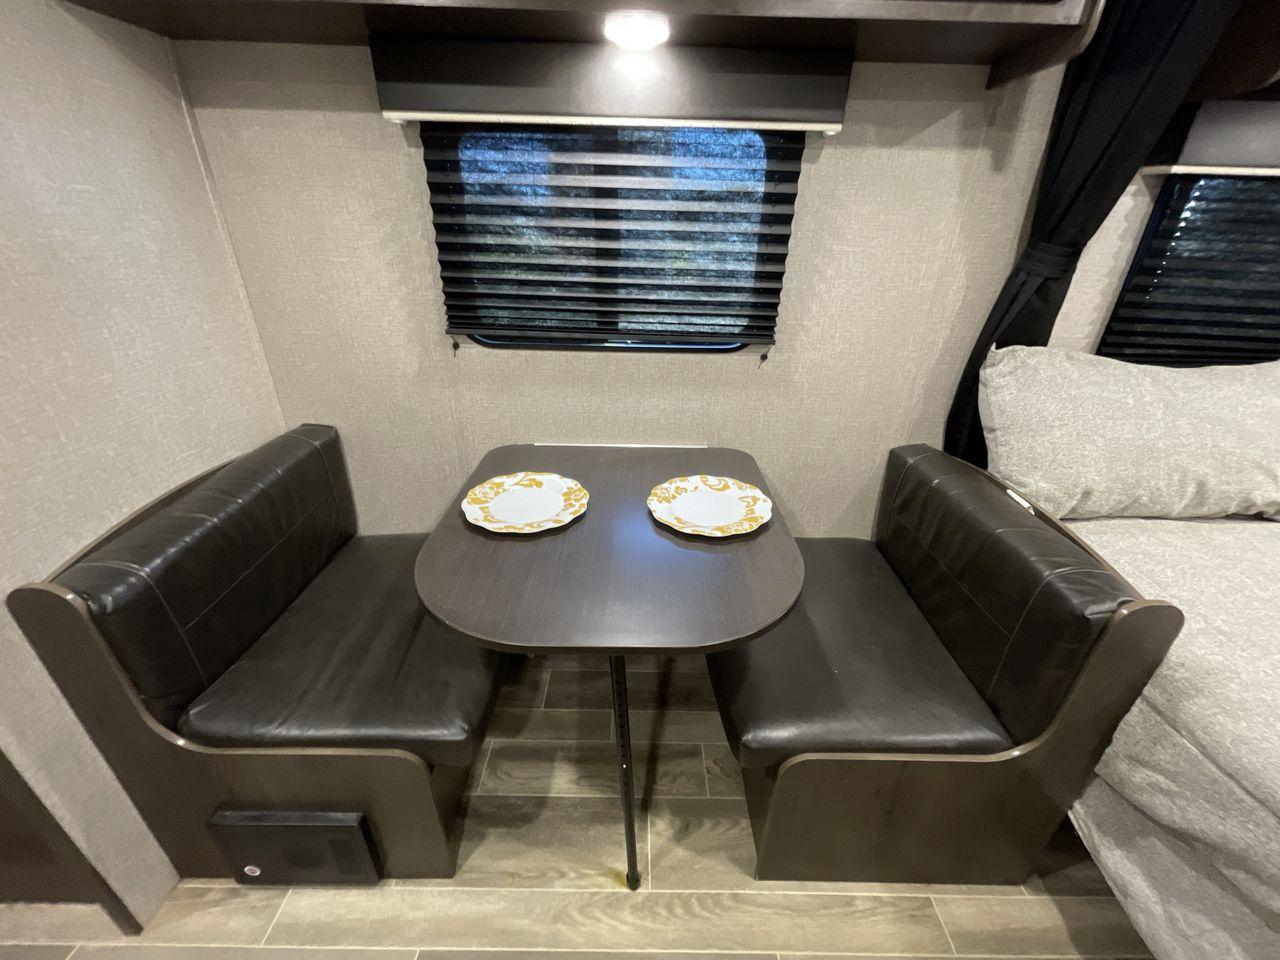 2021 JAYCO JAY FLIGHT SLX 174BH (1UJBJ0AJ1M1) , Length: 21.67 ft | Dry Weight: 3,075 lbs | GVWR: 3,950 lbs | Slides: 0 transmission, located at 4319 N Main St, Cleburne, TX, 76033, (817) 678-5133, 32.385960, -97.391212 - Take the 2021 Jayco Jay Flight SLX 174BH travel trailer out on your camping adventures. This lightweight and small RV is ideal for people looking for an affordable and cozy way to enjoy the great outdoors. The dimensions of this unit are 21.67 ft in length, 7.08 ft in width, and 9.17 ft in height. I - Photo #12